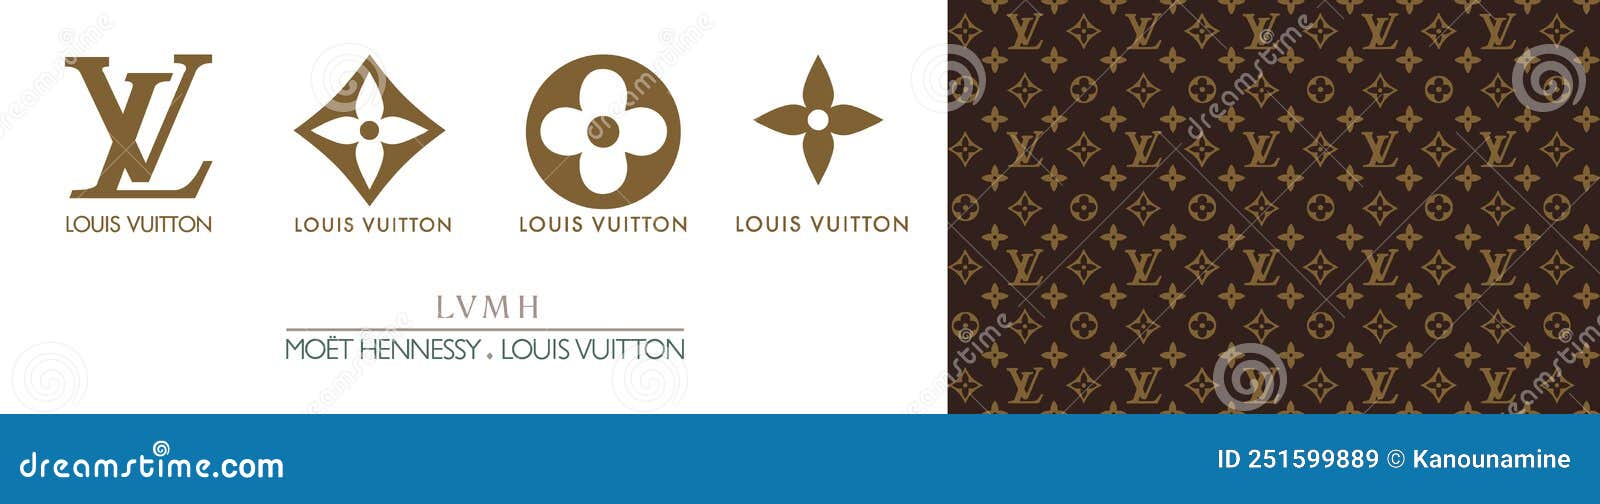 Download Louis Vuitton Logo Vector SVG EPS PDF Ai and PNG 359 KB Free